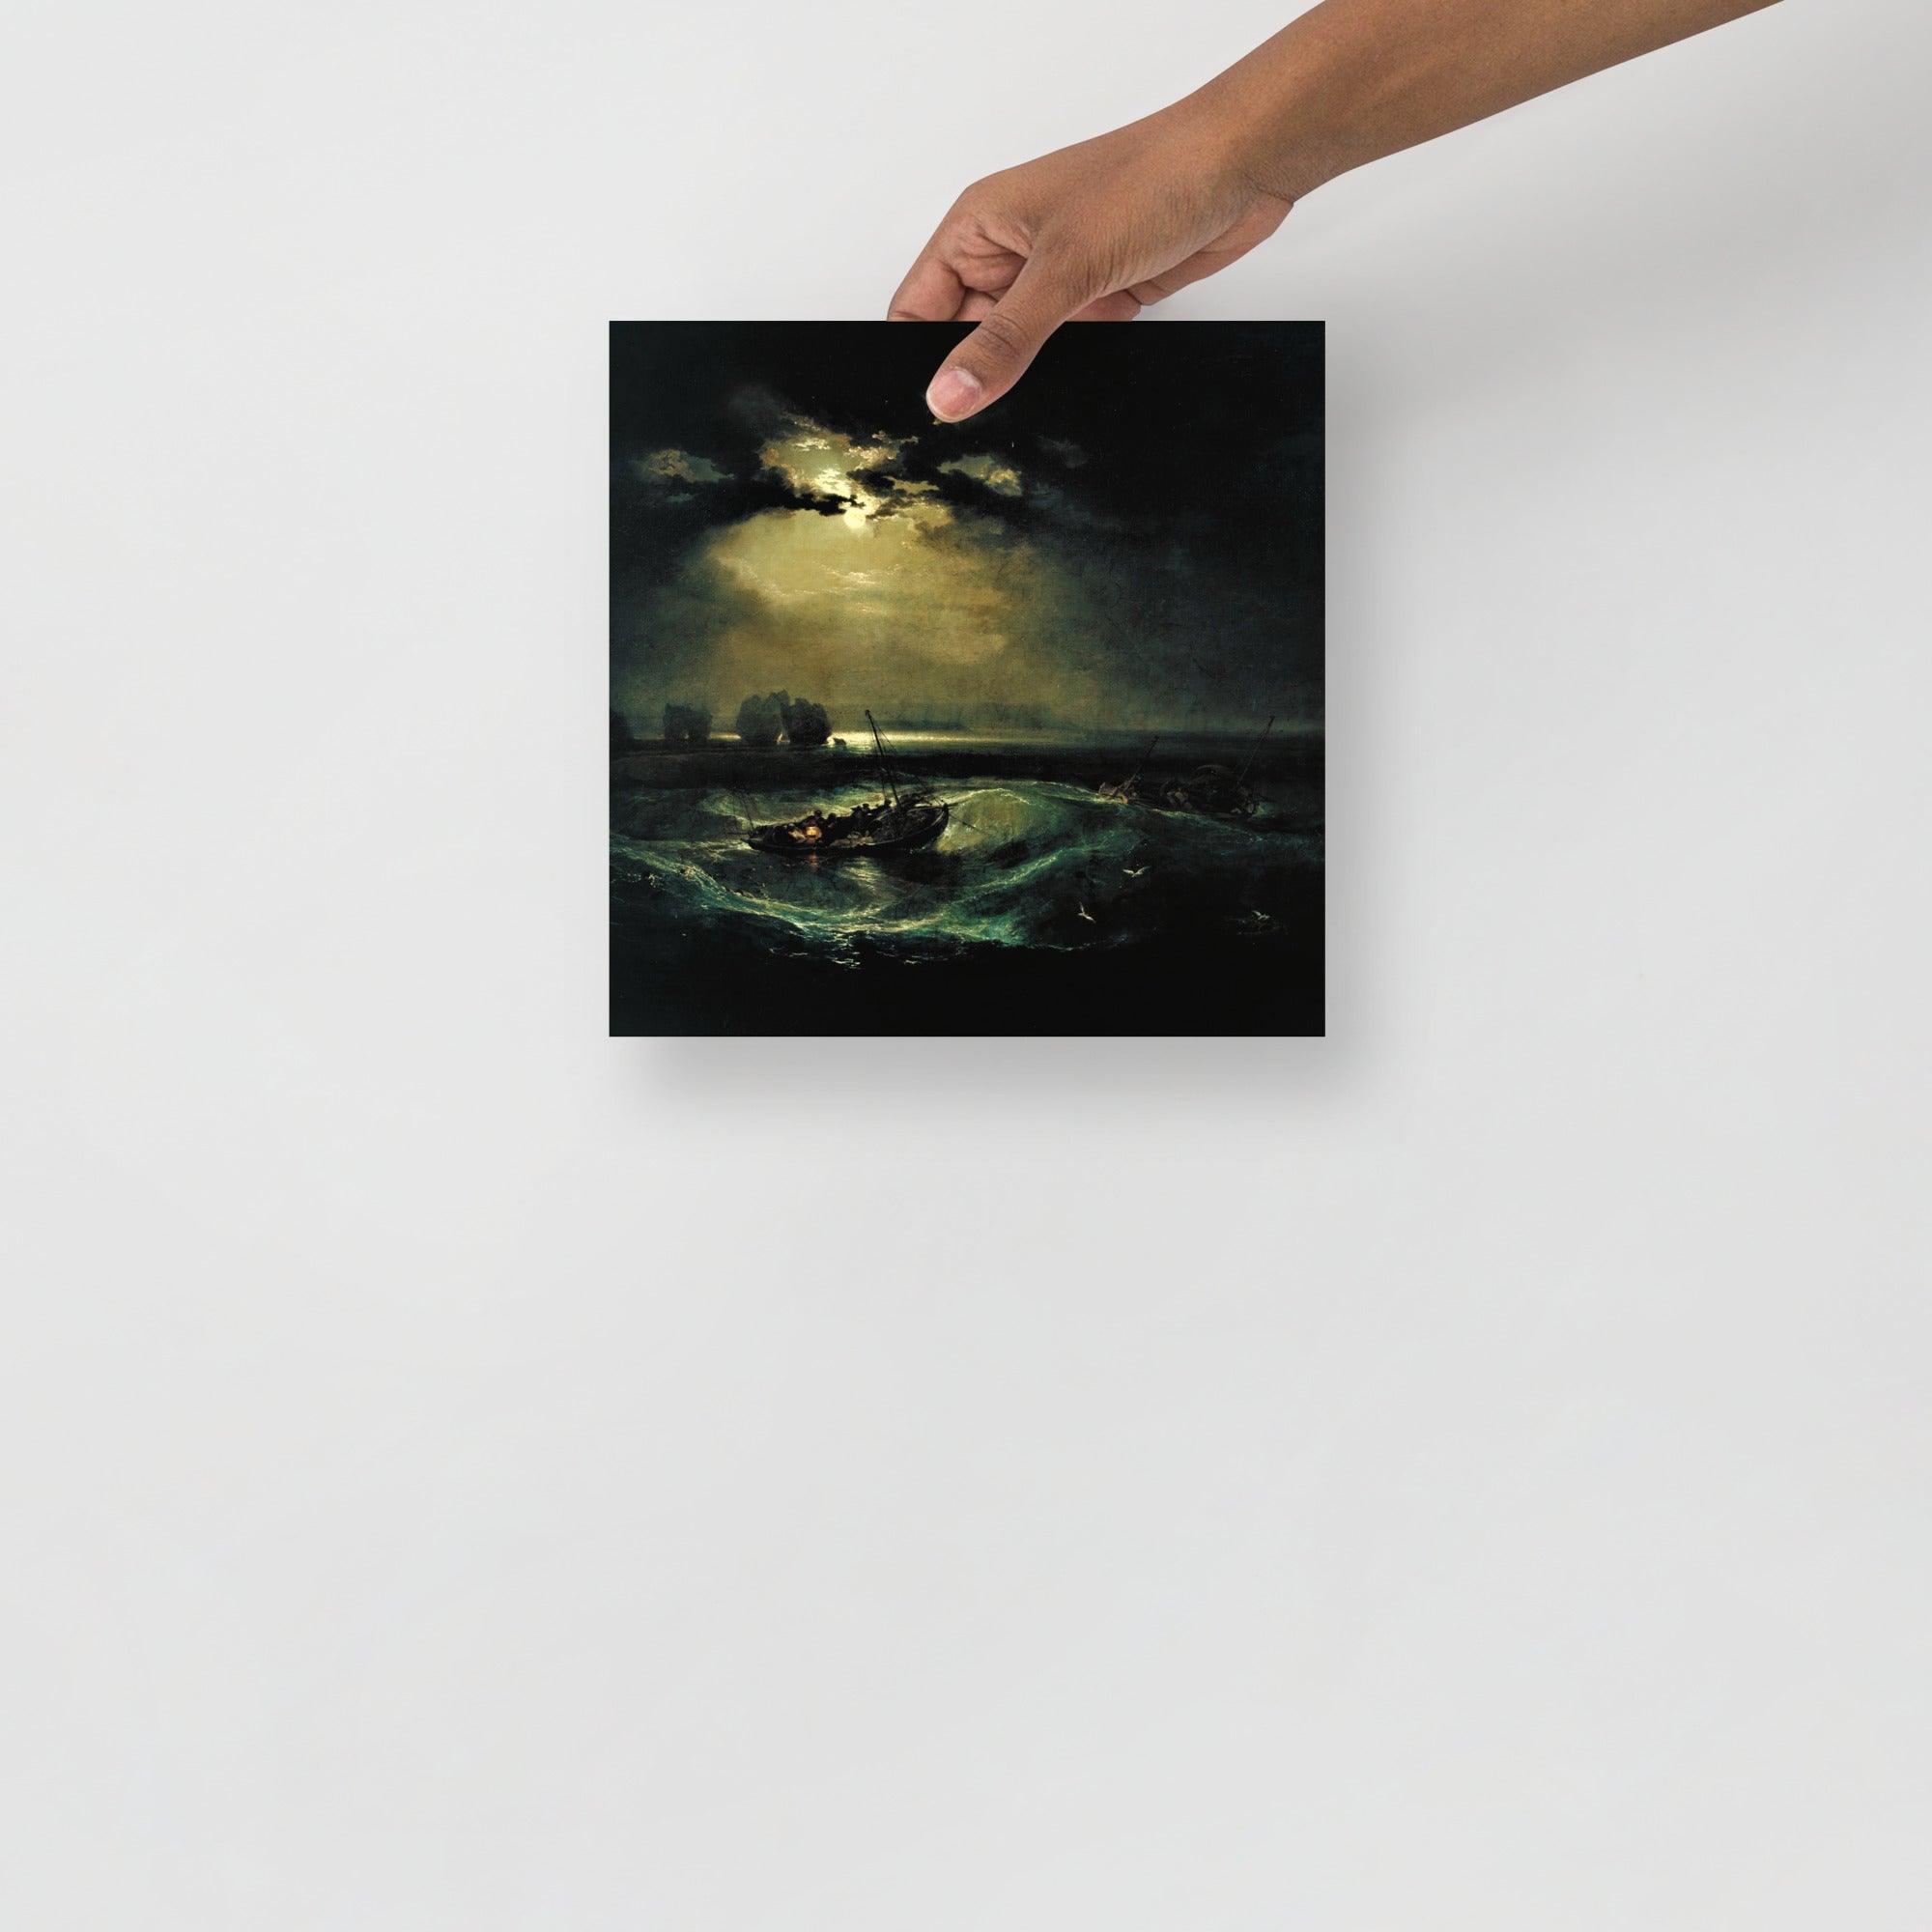 A Fishermen at Sea by William Turner poster on a plain backdrop in size 10x10”.